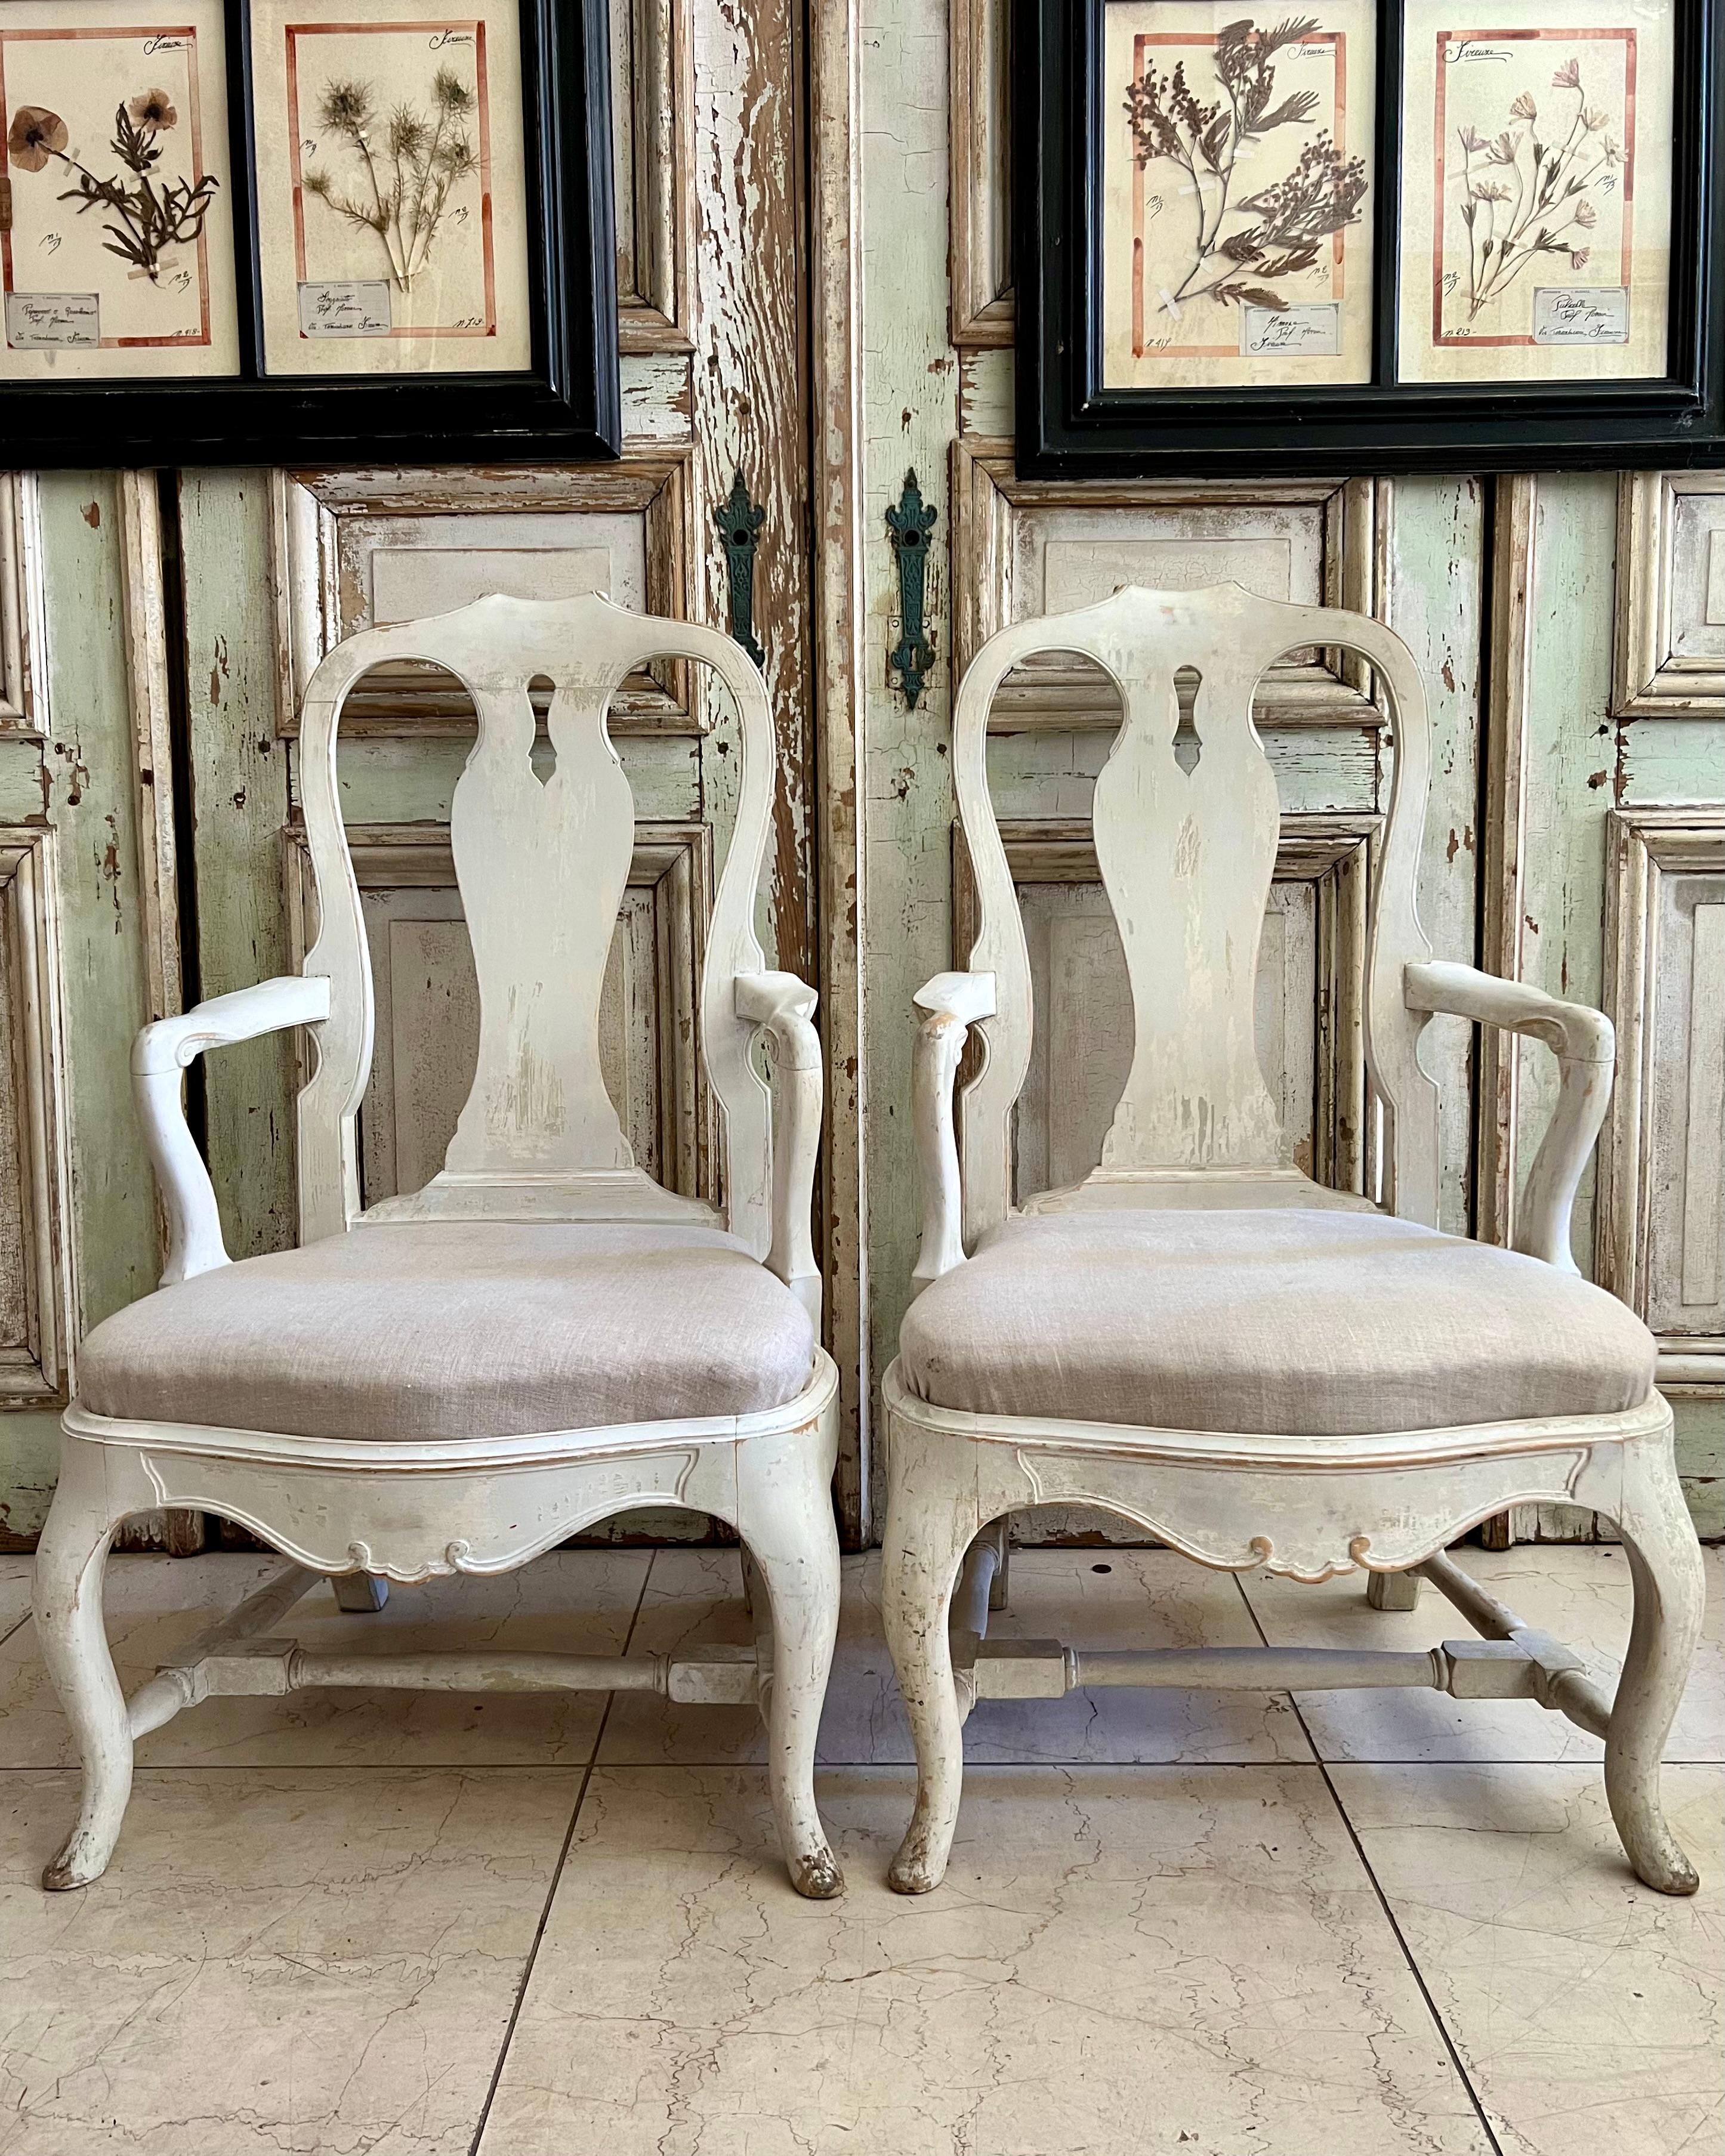 A pair of 19th century Rococo style Armchair in draped old paint finish, pierced back, carved splats and apron - resting on cabriole legs.
Movable seat cushion covered in palest color linen.
Very heavy solid wood and sturdy chairs.